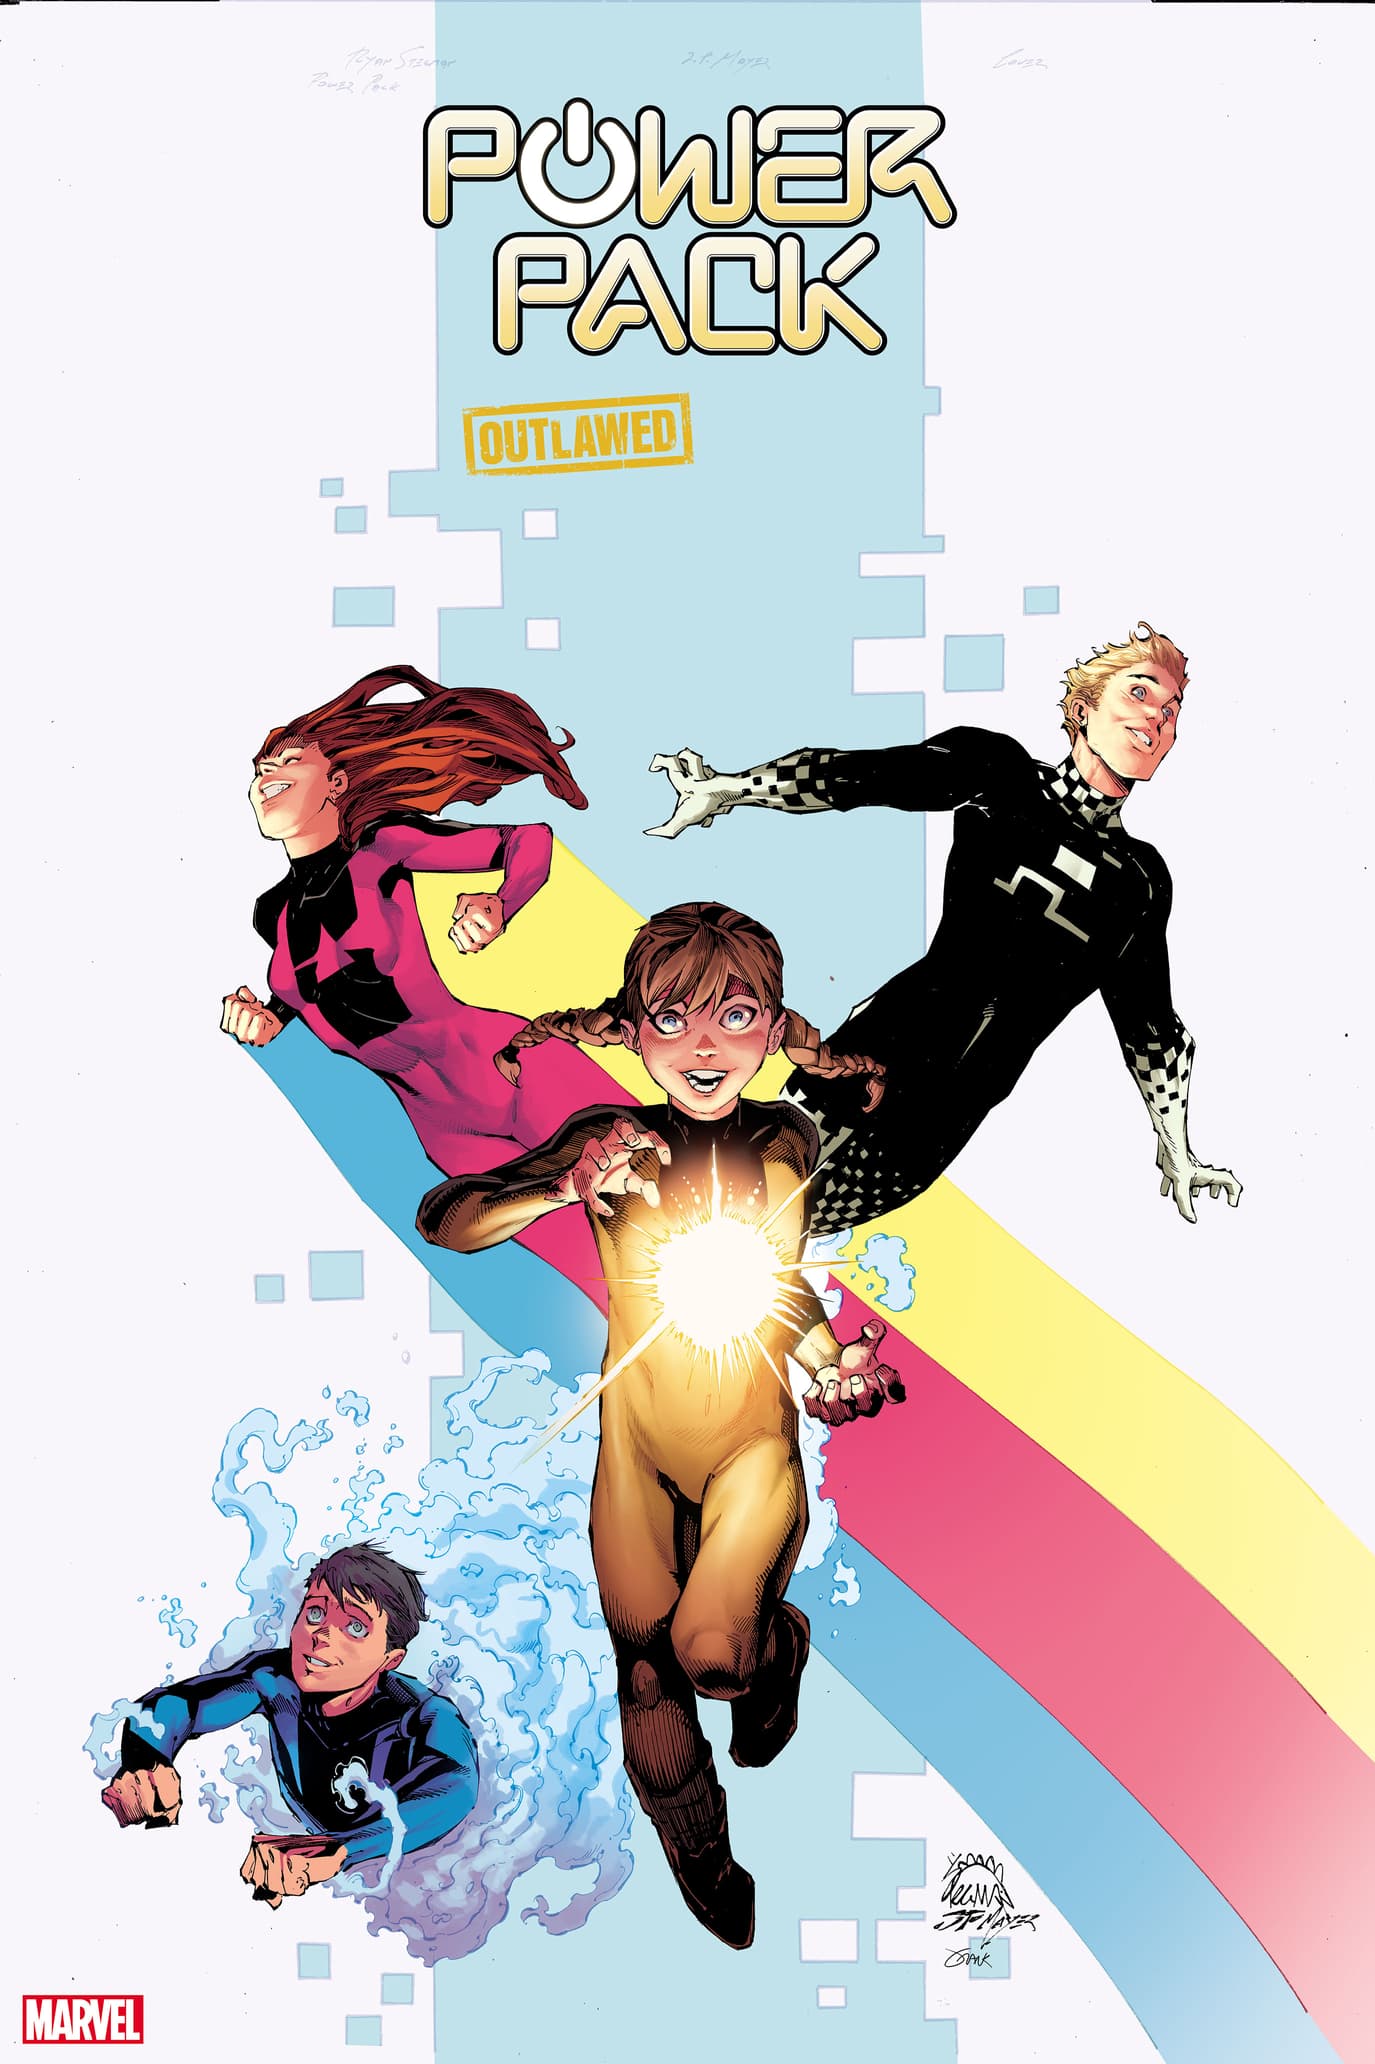 Power Pack #1 cover